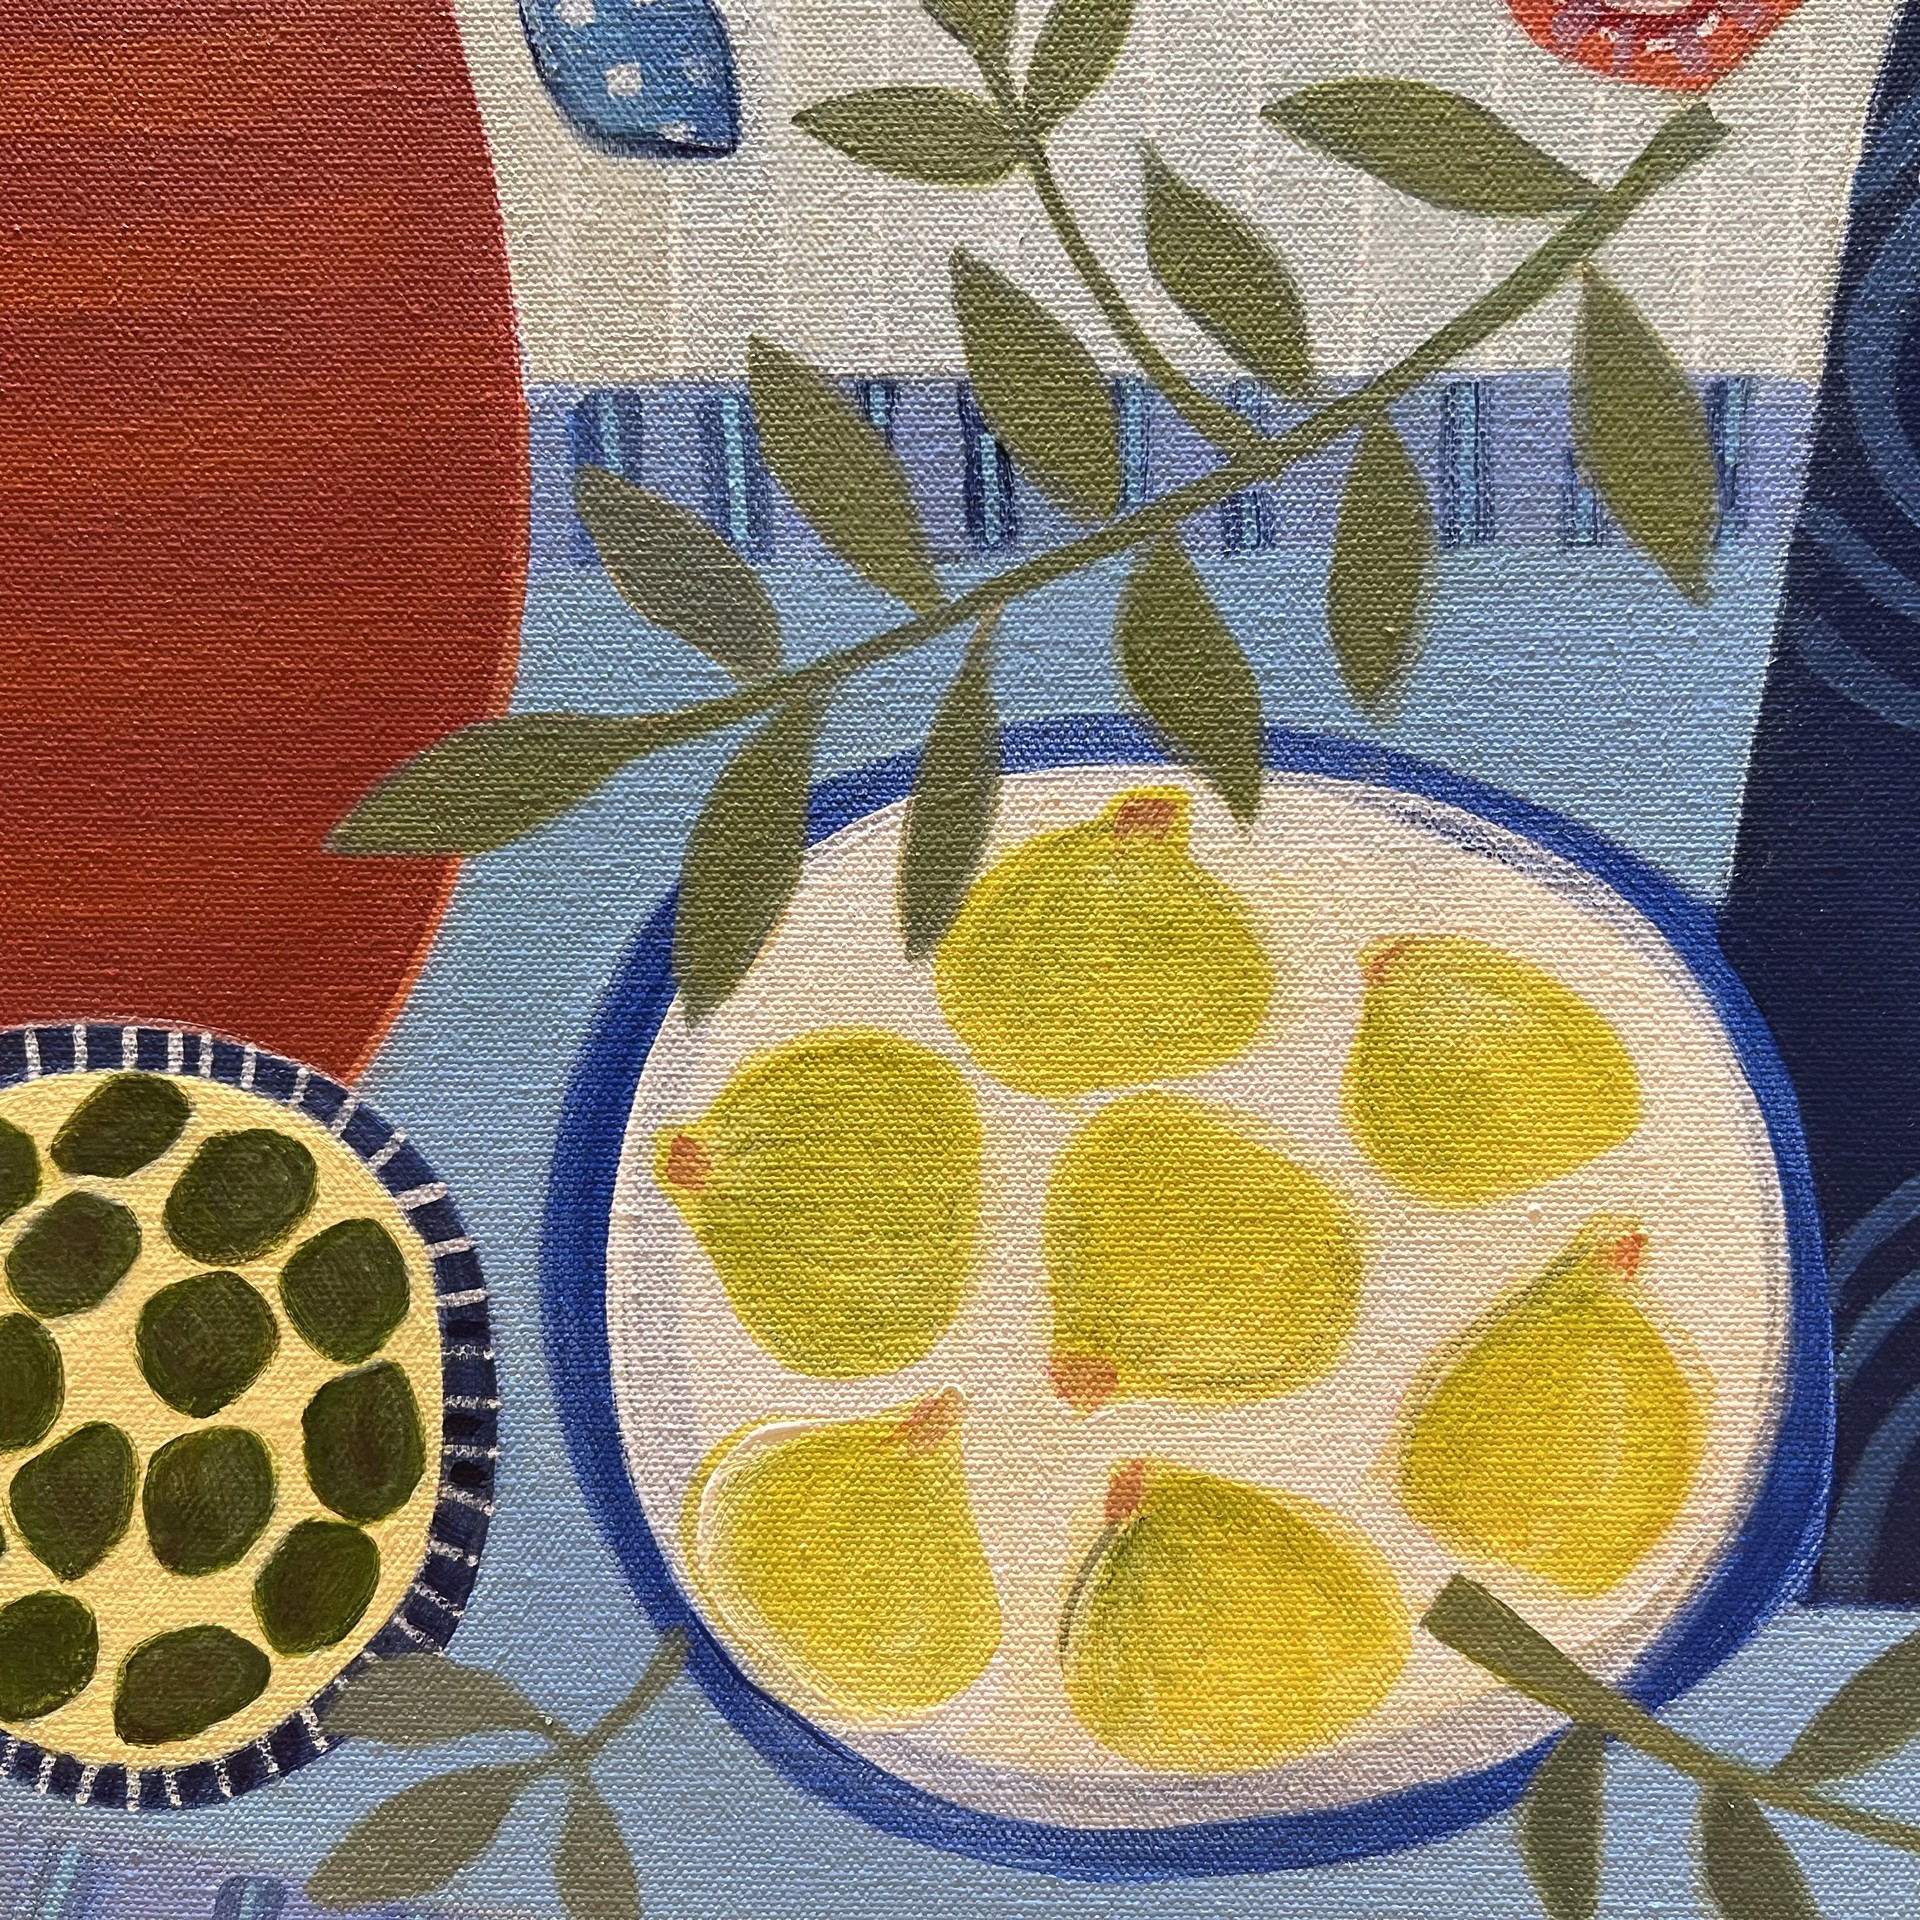 Olives and Figs by Joyce Grasso